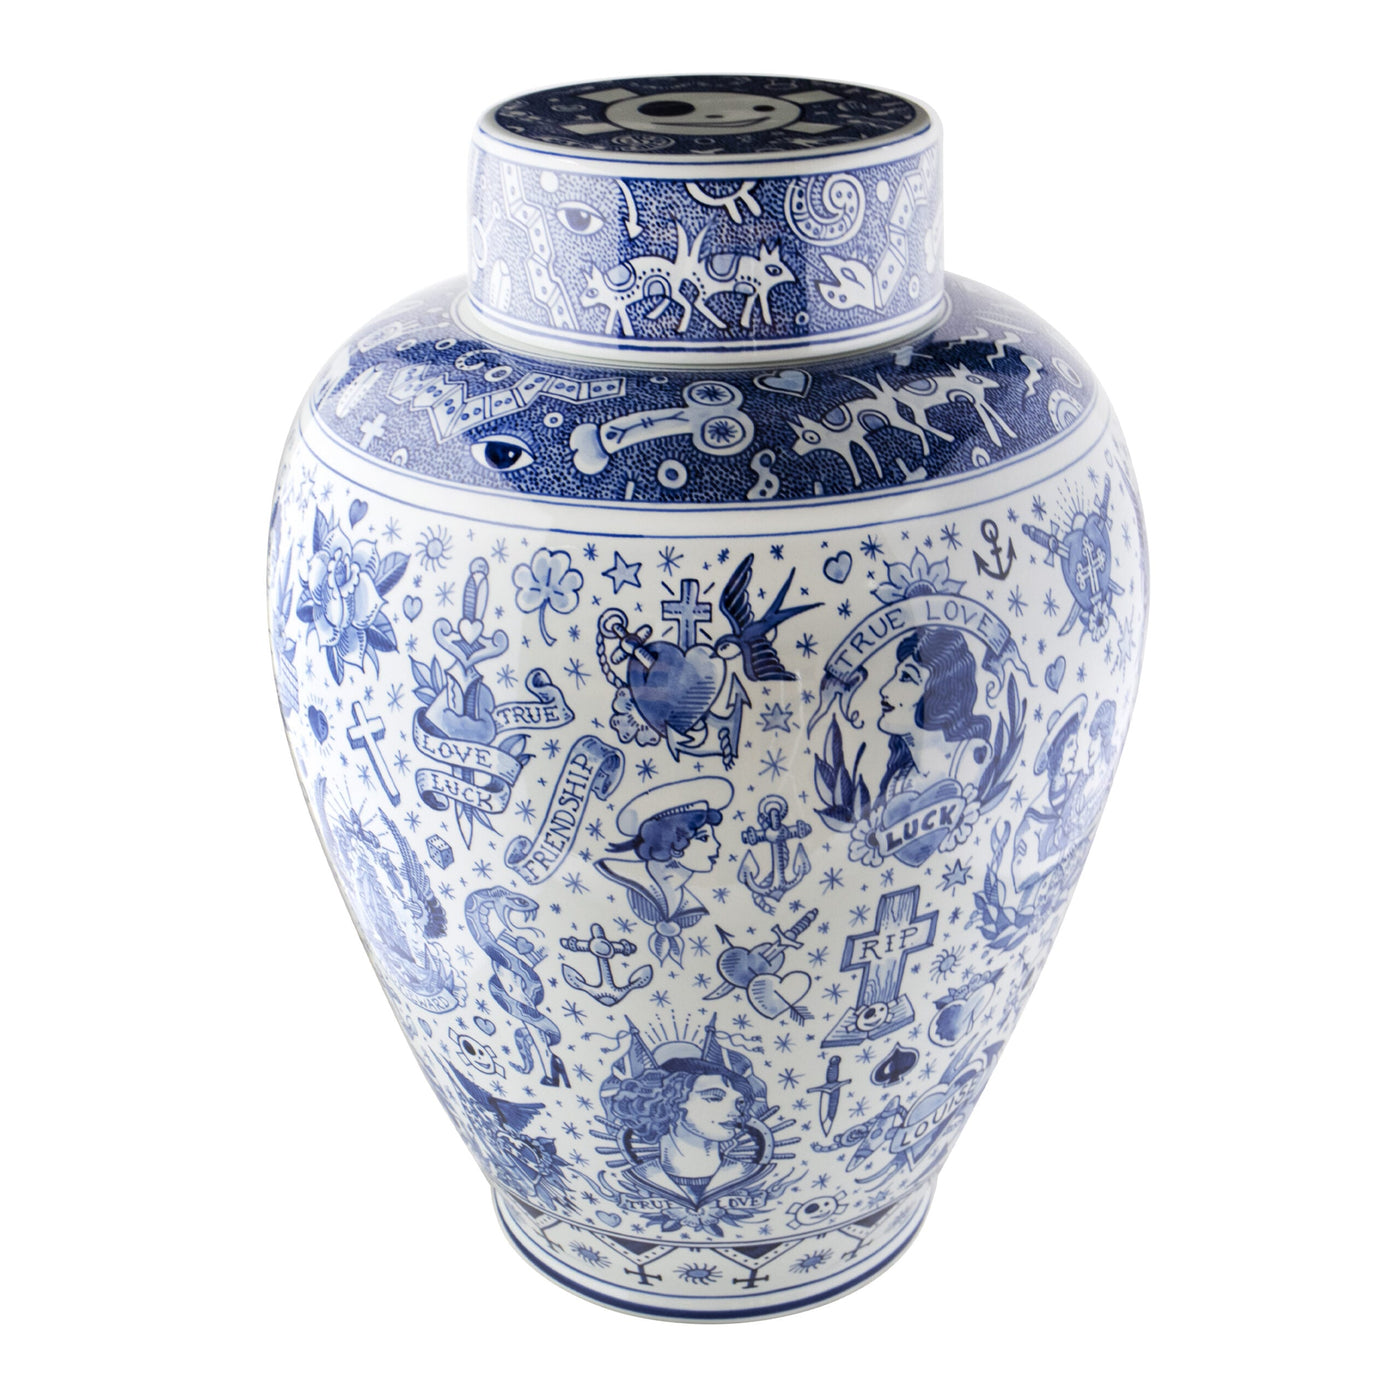 Vase True Love Hand-Painted by Royal Delft